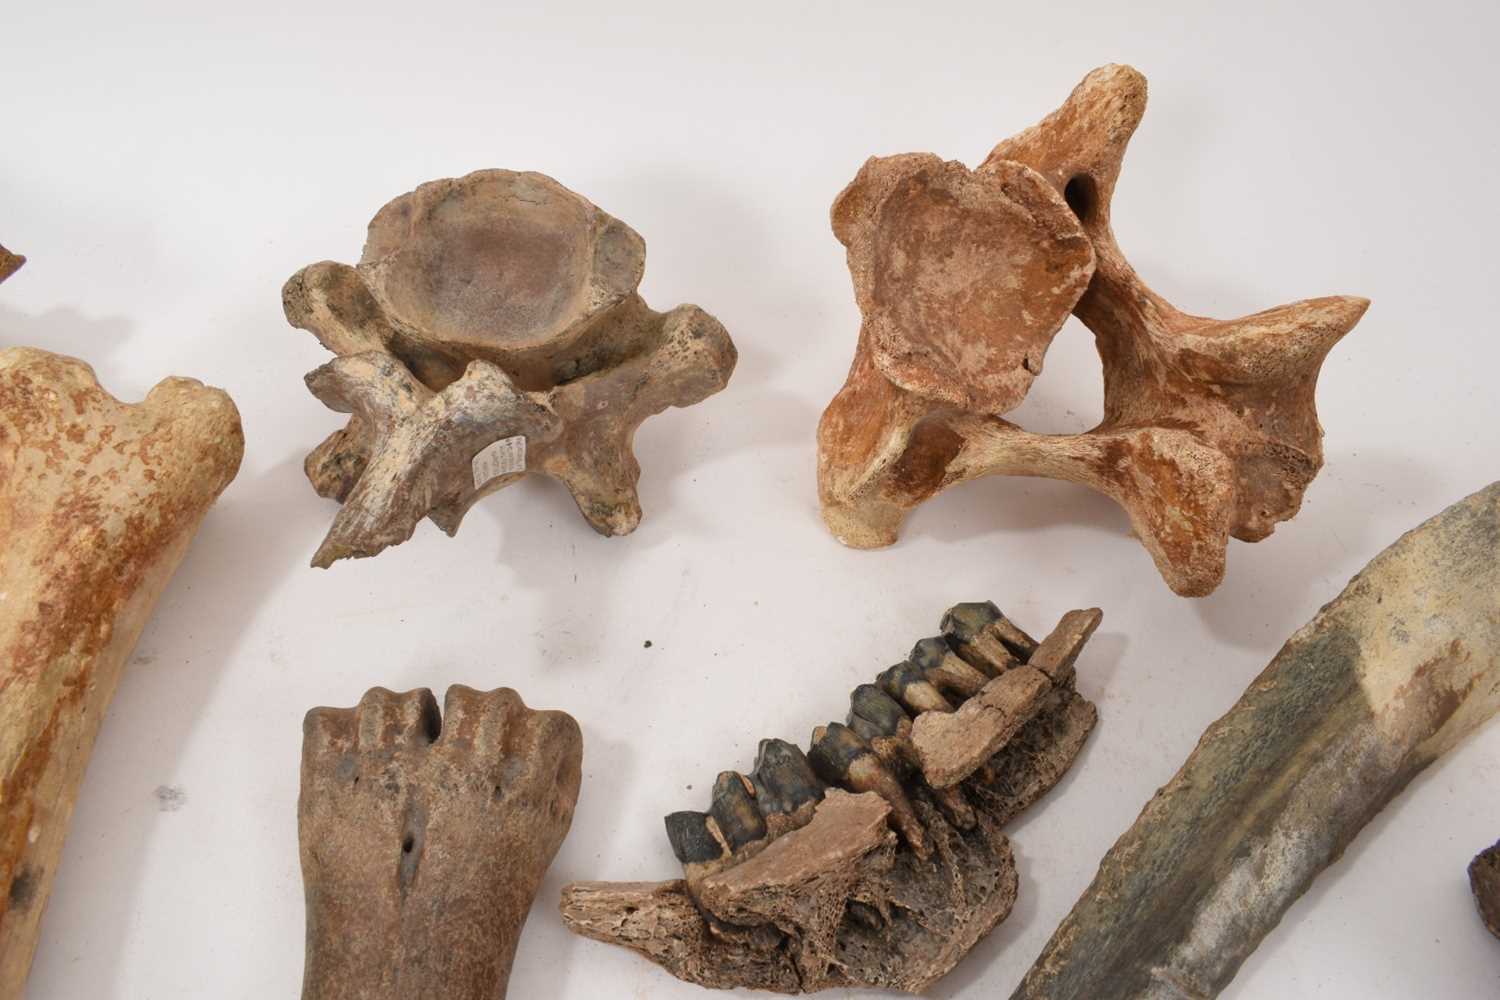 Ice age fossils, including cave bear jaw, others - Image 3 of 4